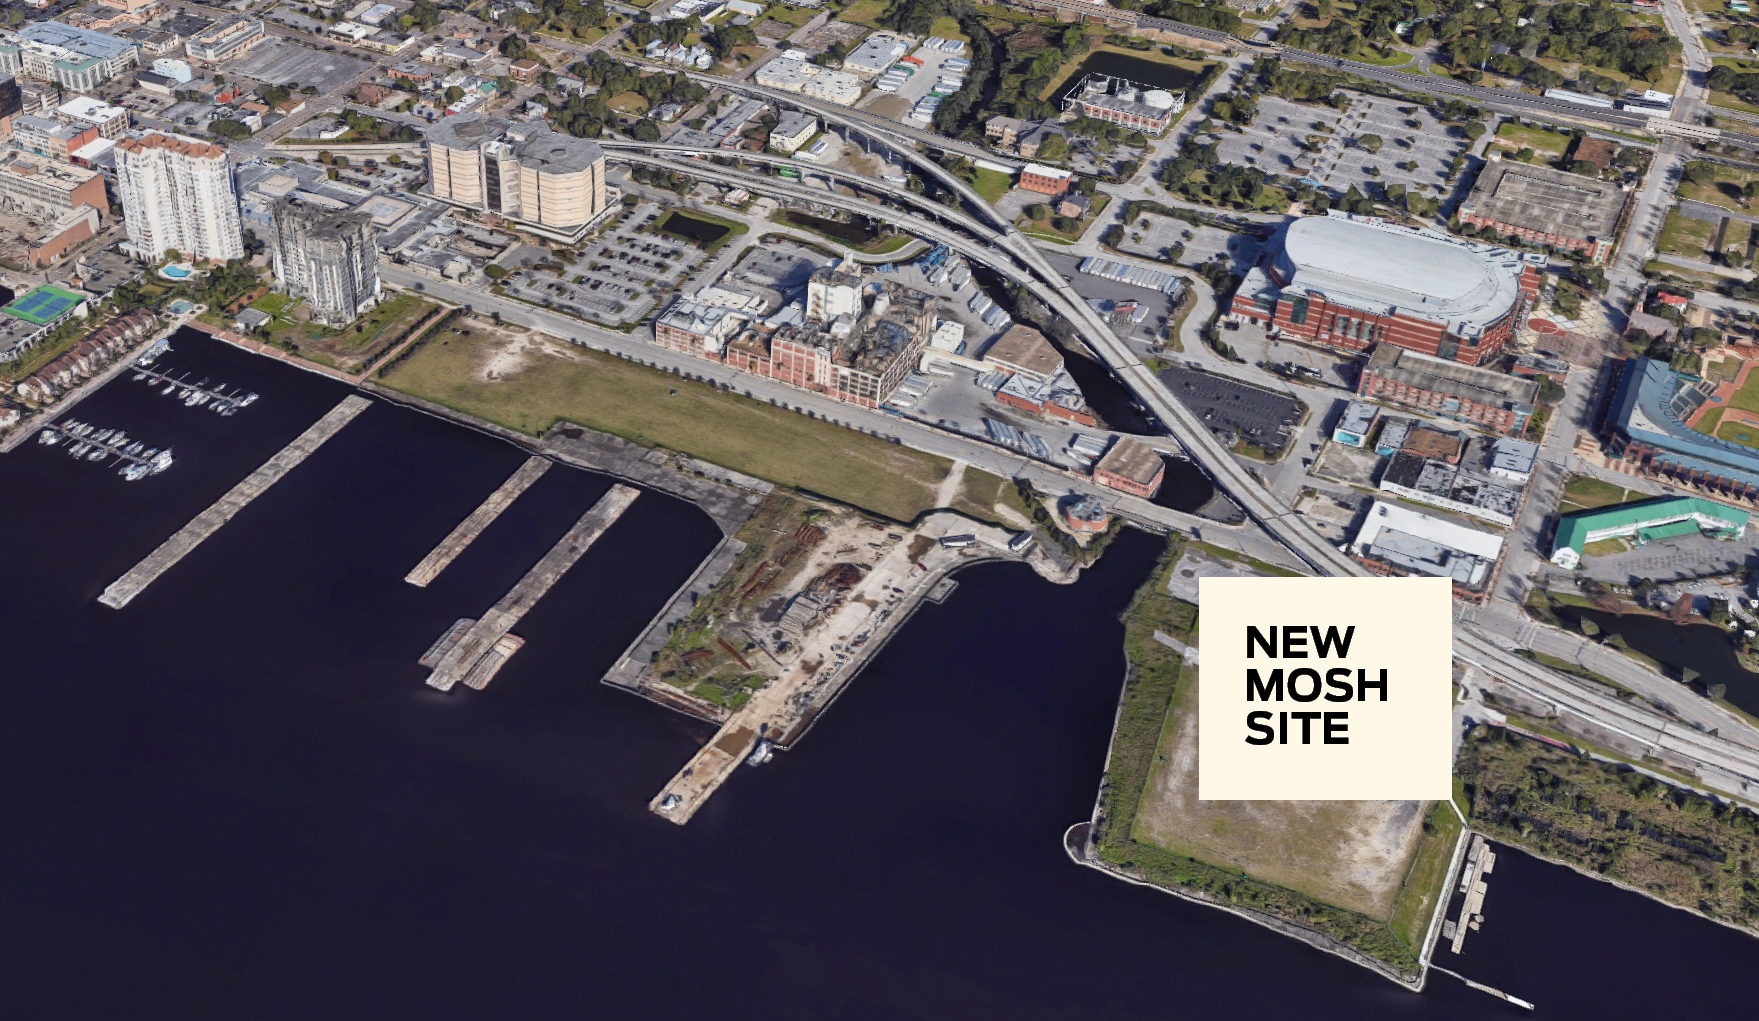 The new MOSH site at the Shipyards.